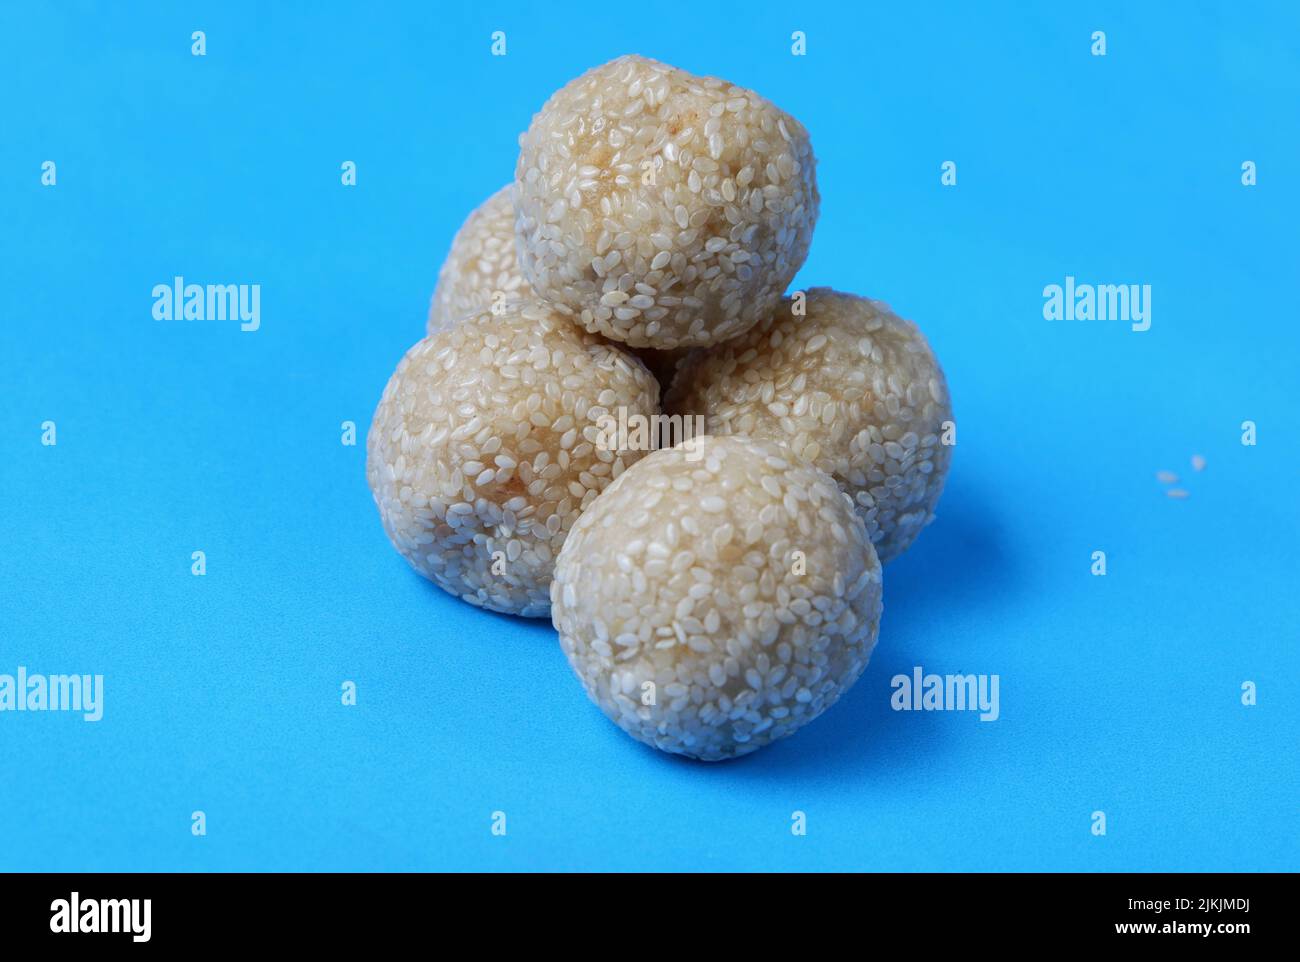 Onde onde. Traditional Indonesian food, isolated on a blue background Stock Photo